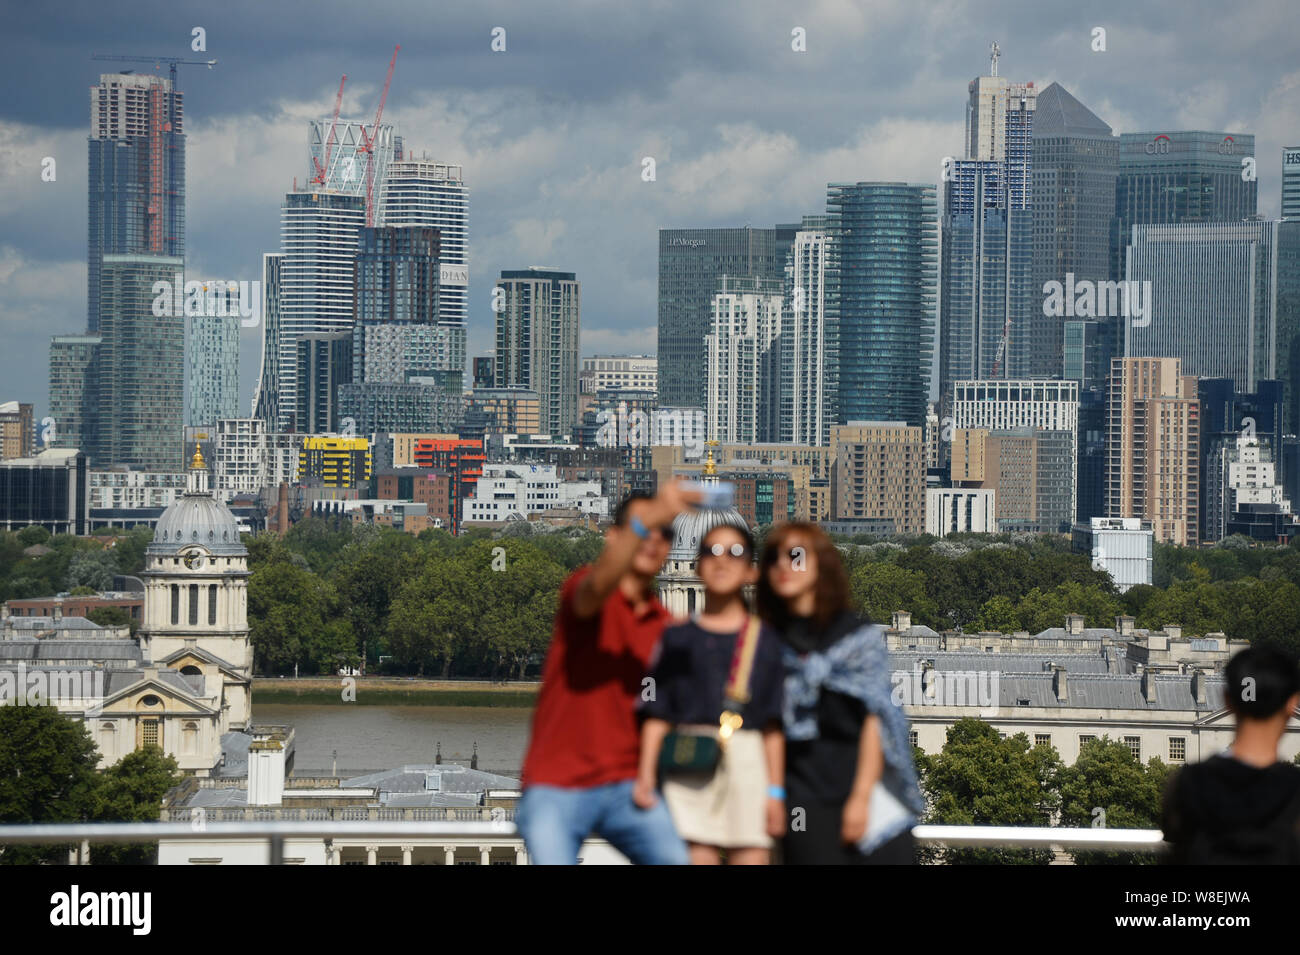 People take selfies in front of the Old Royal Naval College and Canary Wharf, from the Royal Observatory in Greenwich, London. Warnings for rain and wind came into force across nearly all of the UK today. Stock Photo